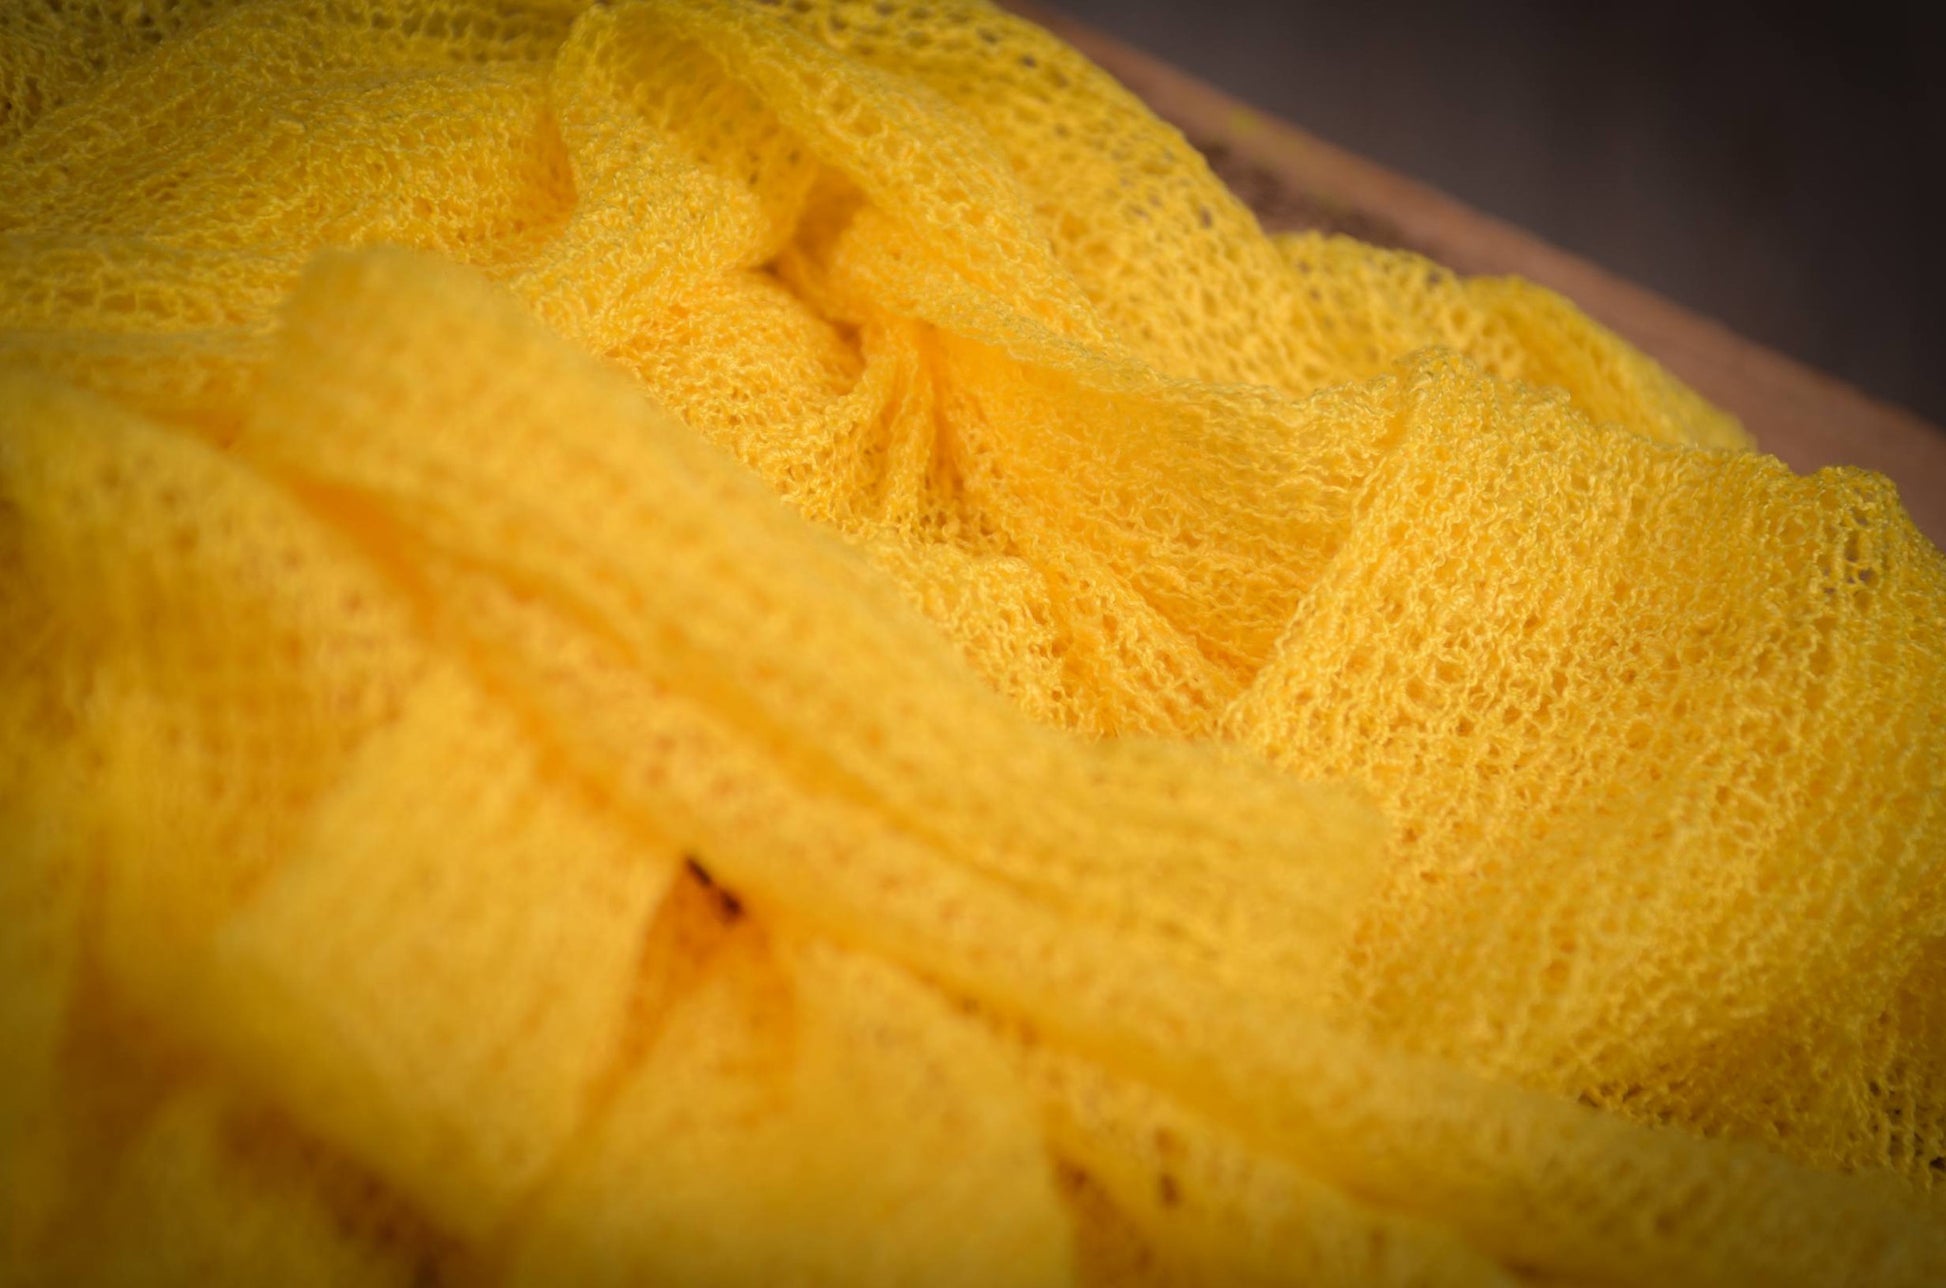 Stretch Knit Baby Wrap - Yellow-Newborn Photography Props